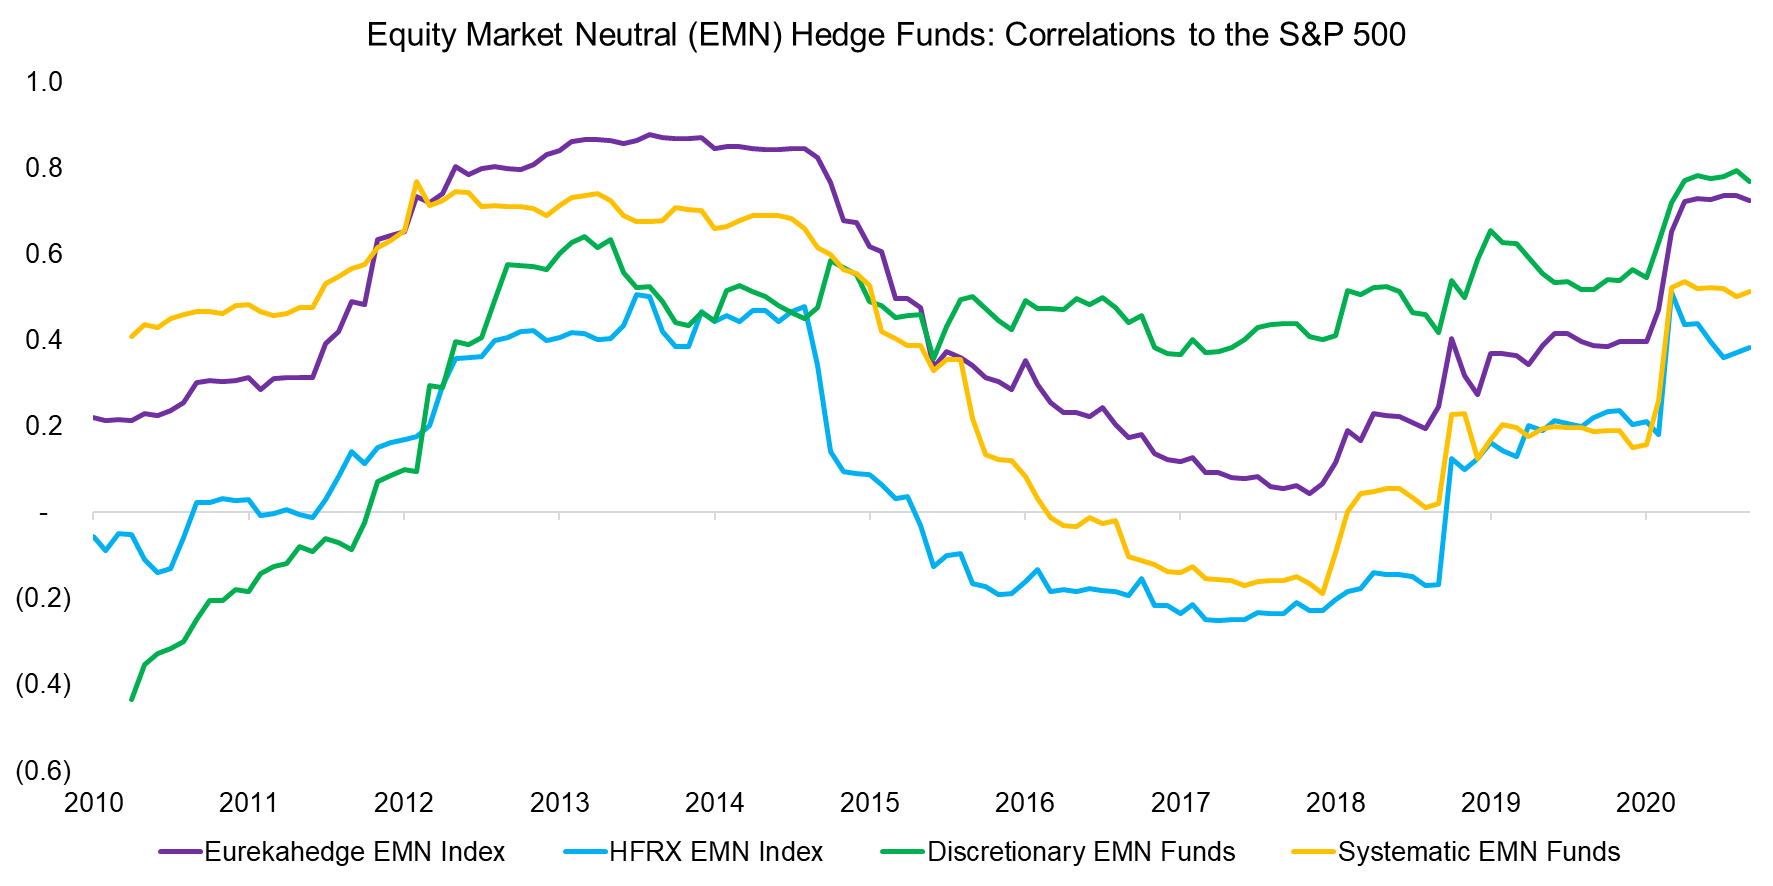 Equity Market Neutral (EMN) Hedge Funds Correlations to the S&P 500